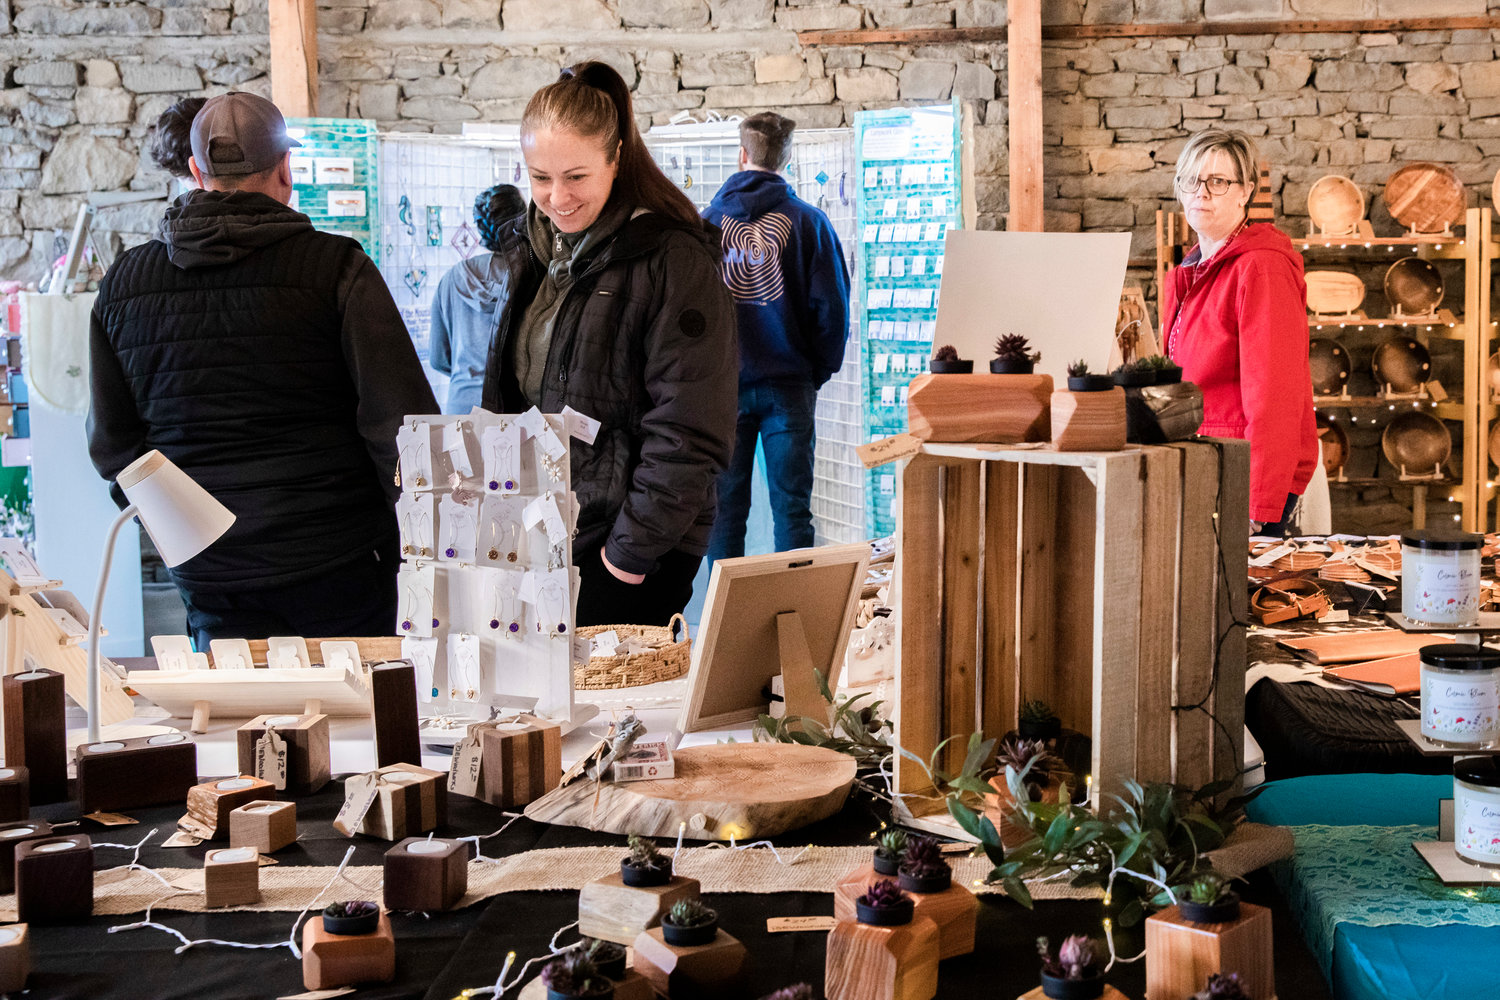 Vistors smile and look on at items on display during the Tenino Arts Spring Market featuring 32 regional artisans inside the Kodiak Room on Sunday.